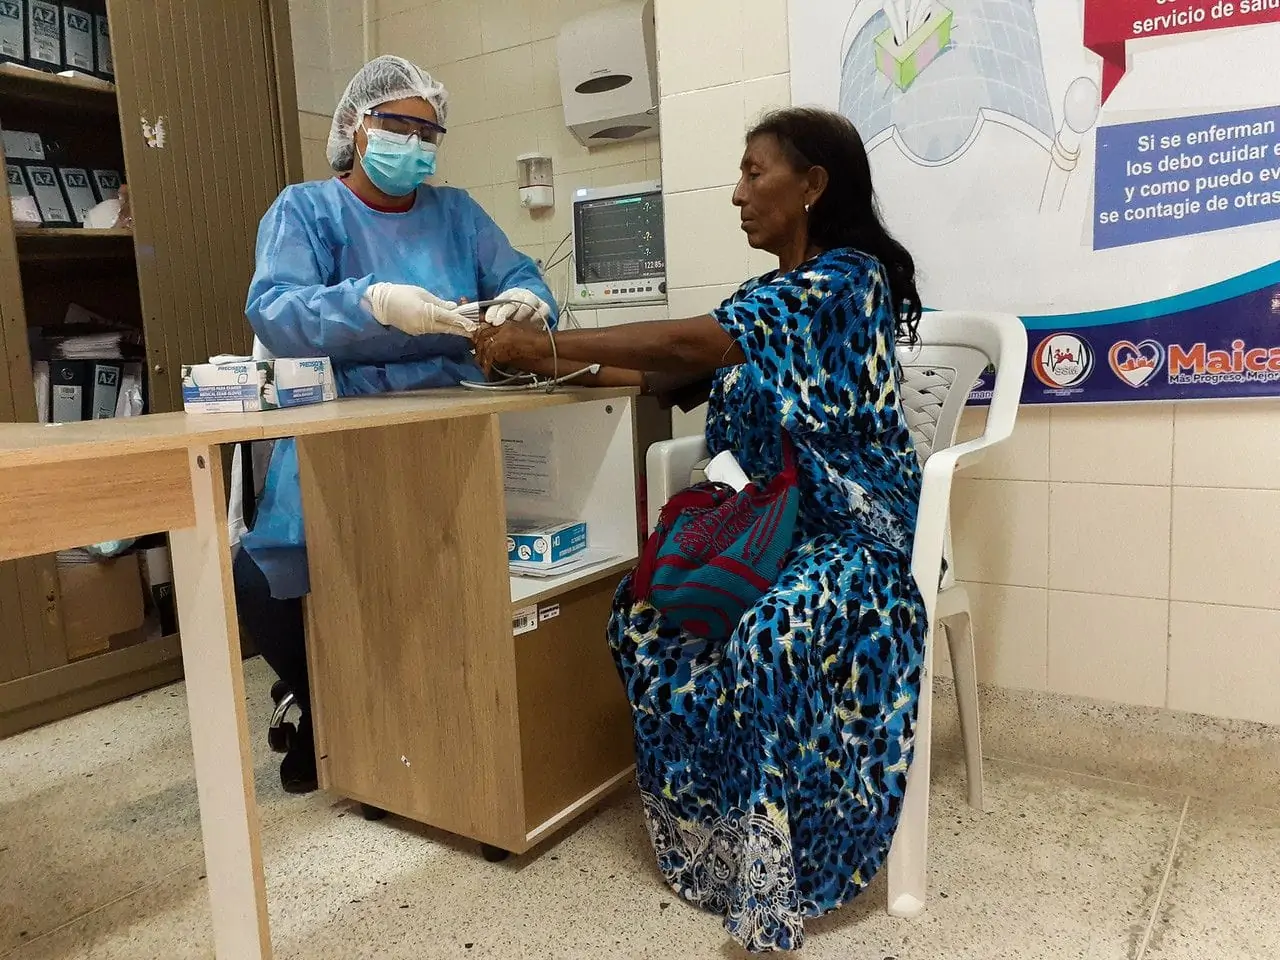 Nursing assistant taking blood pressure of patient at an Americares clinic in Colombia